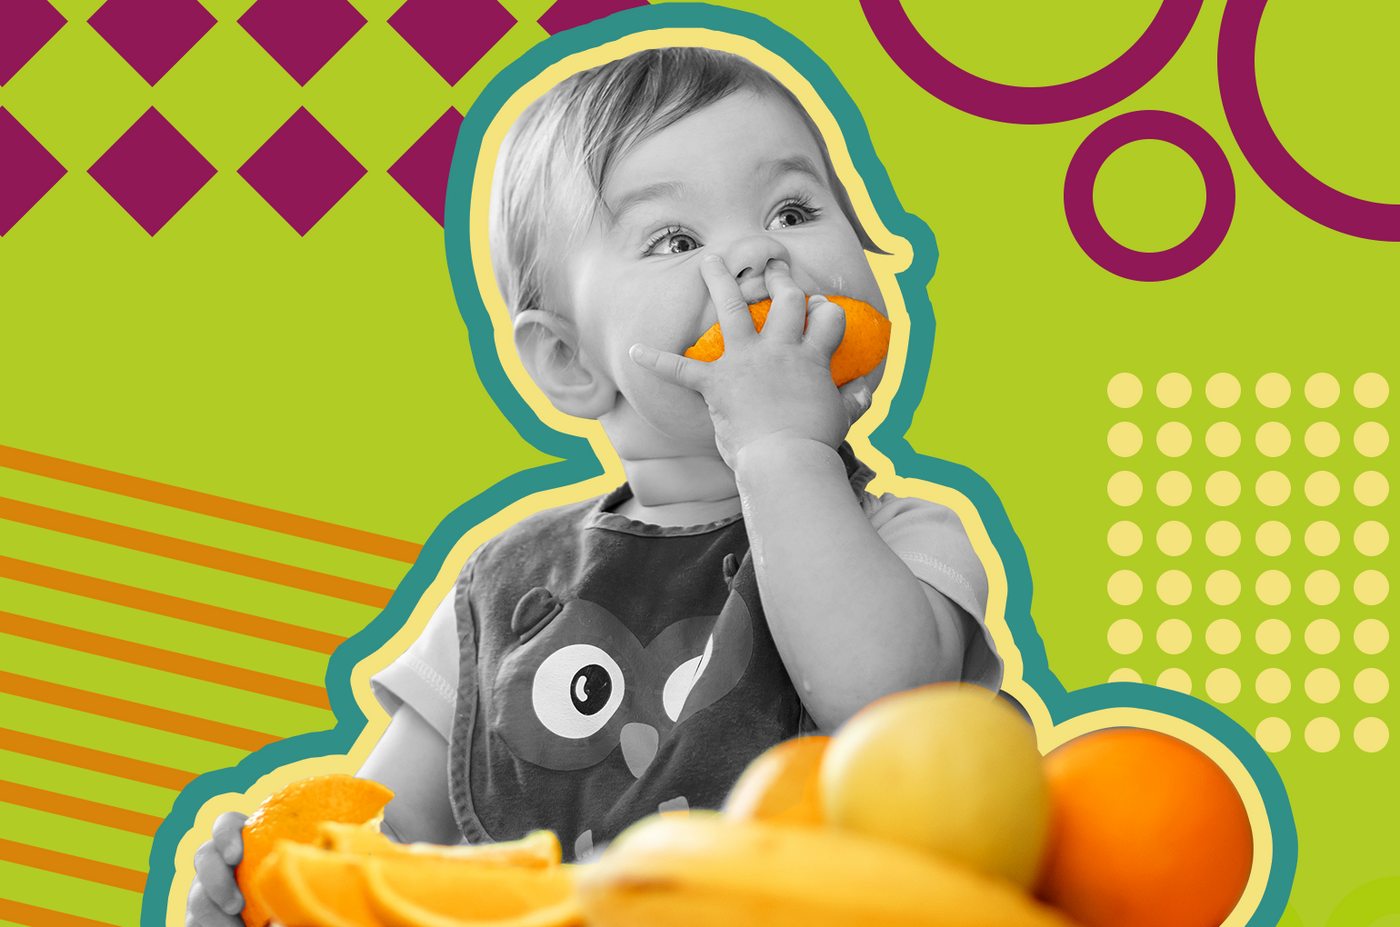 Healthy Food for Toddlers to Eat